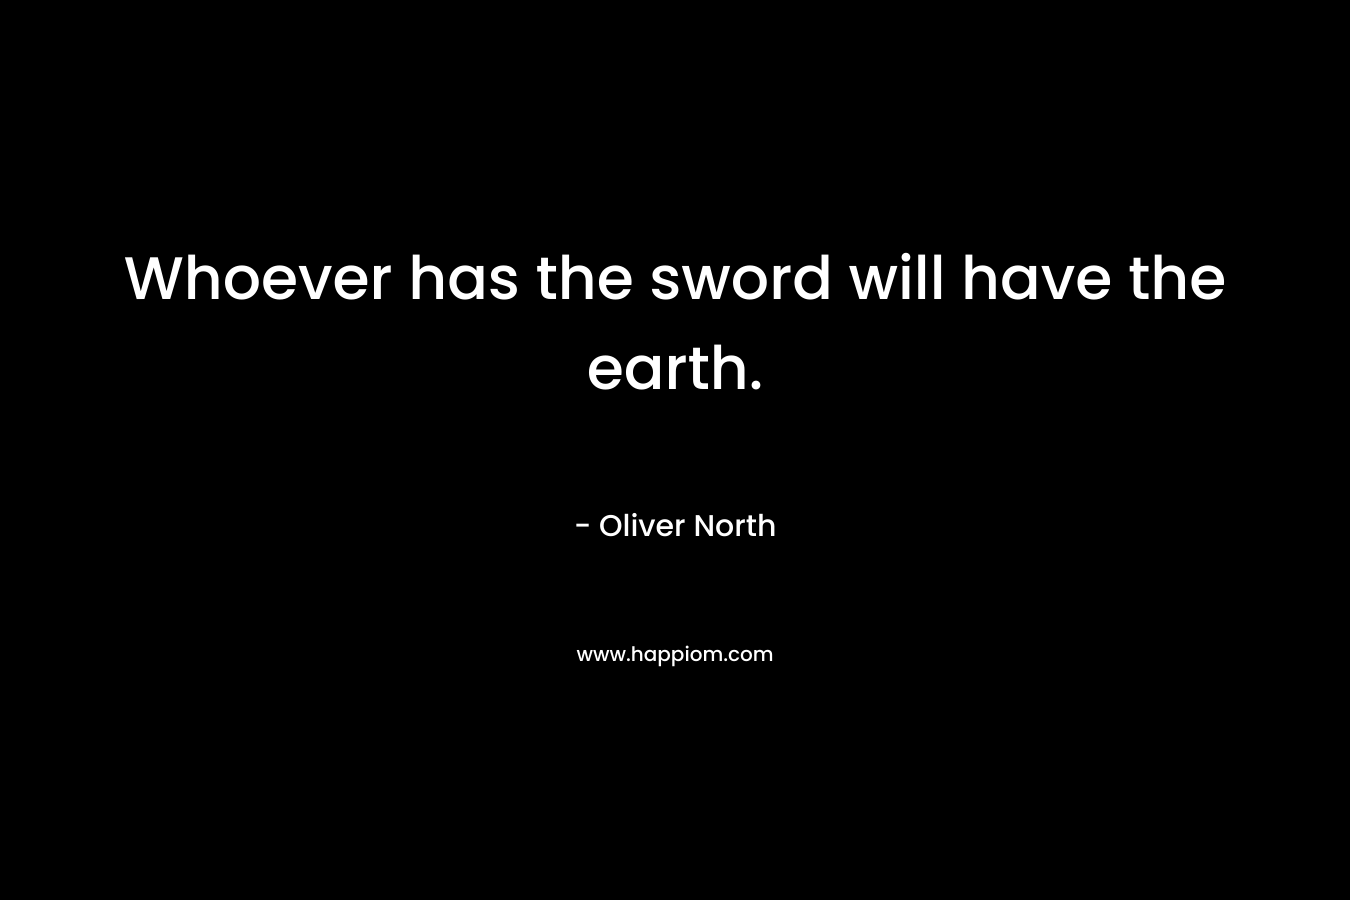 Whoever has the sword will have the earth.